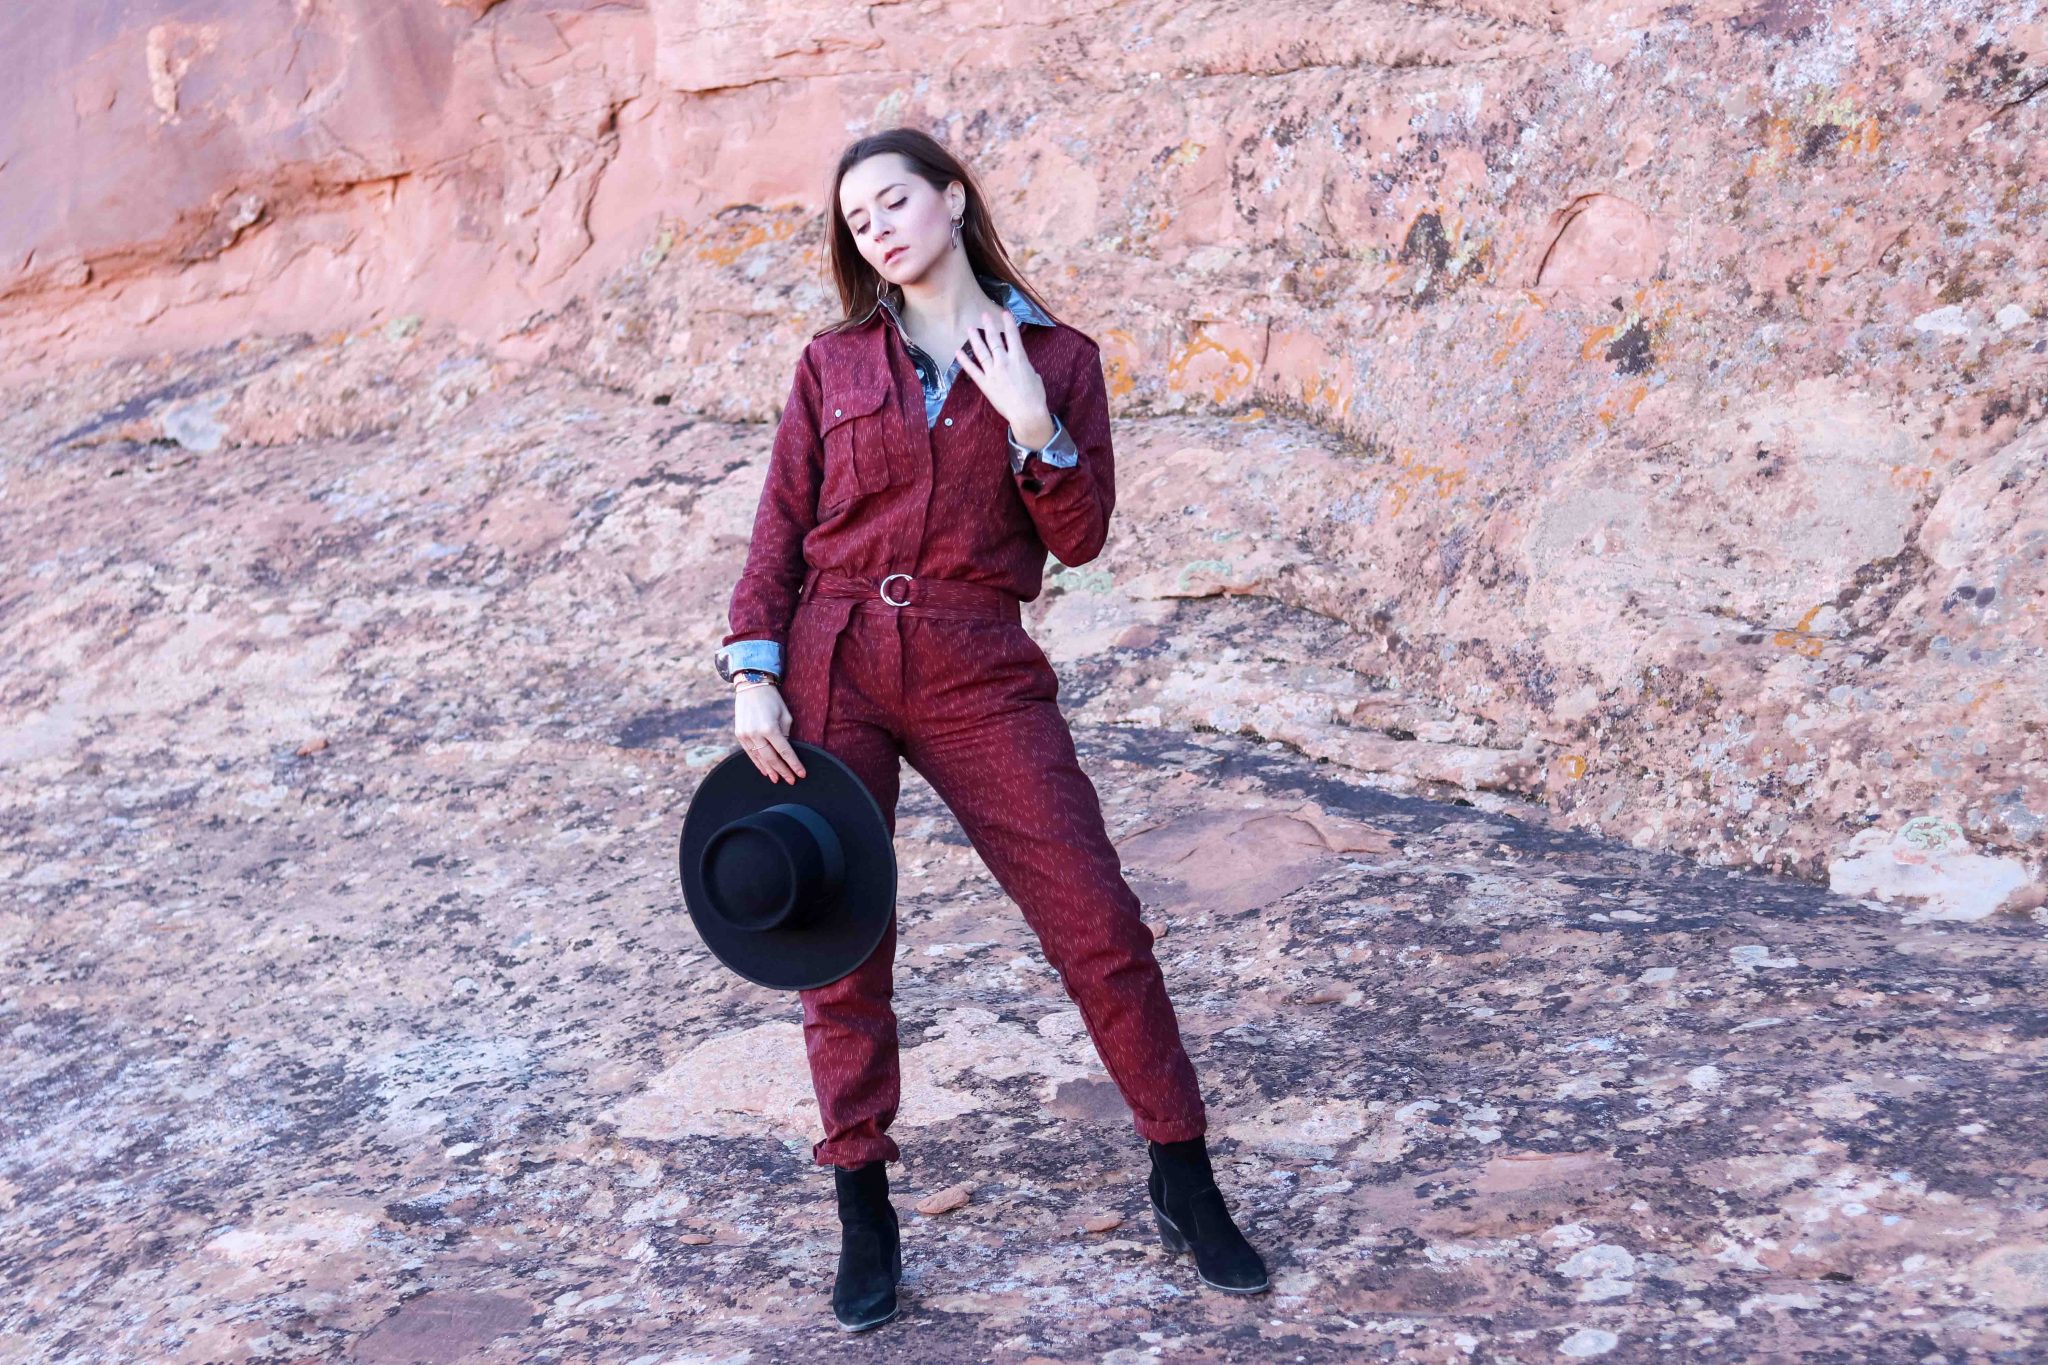 BILLIE JUMPSUIT FABRIC HUNTED AND COLLECTED - ETHICAL FASHION - ARCHES - From Las Vegas to Moab: 5 tips for your road trip: Bryce Canyon, Arches National Park, Canyonlands national park